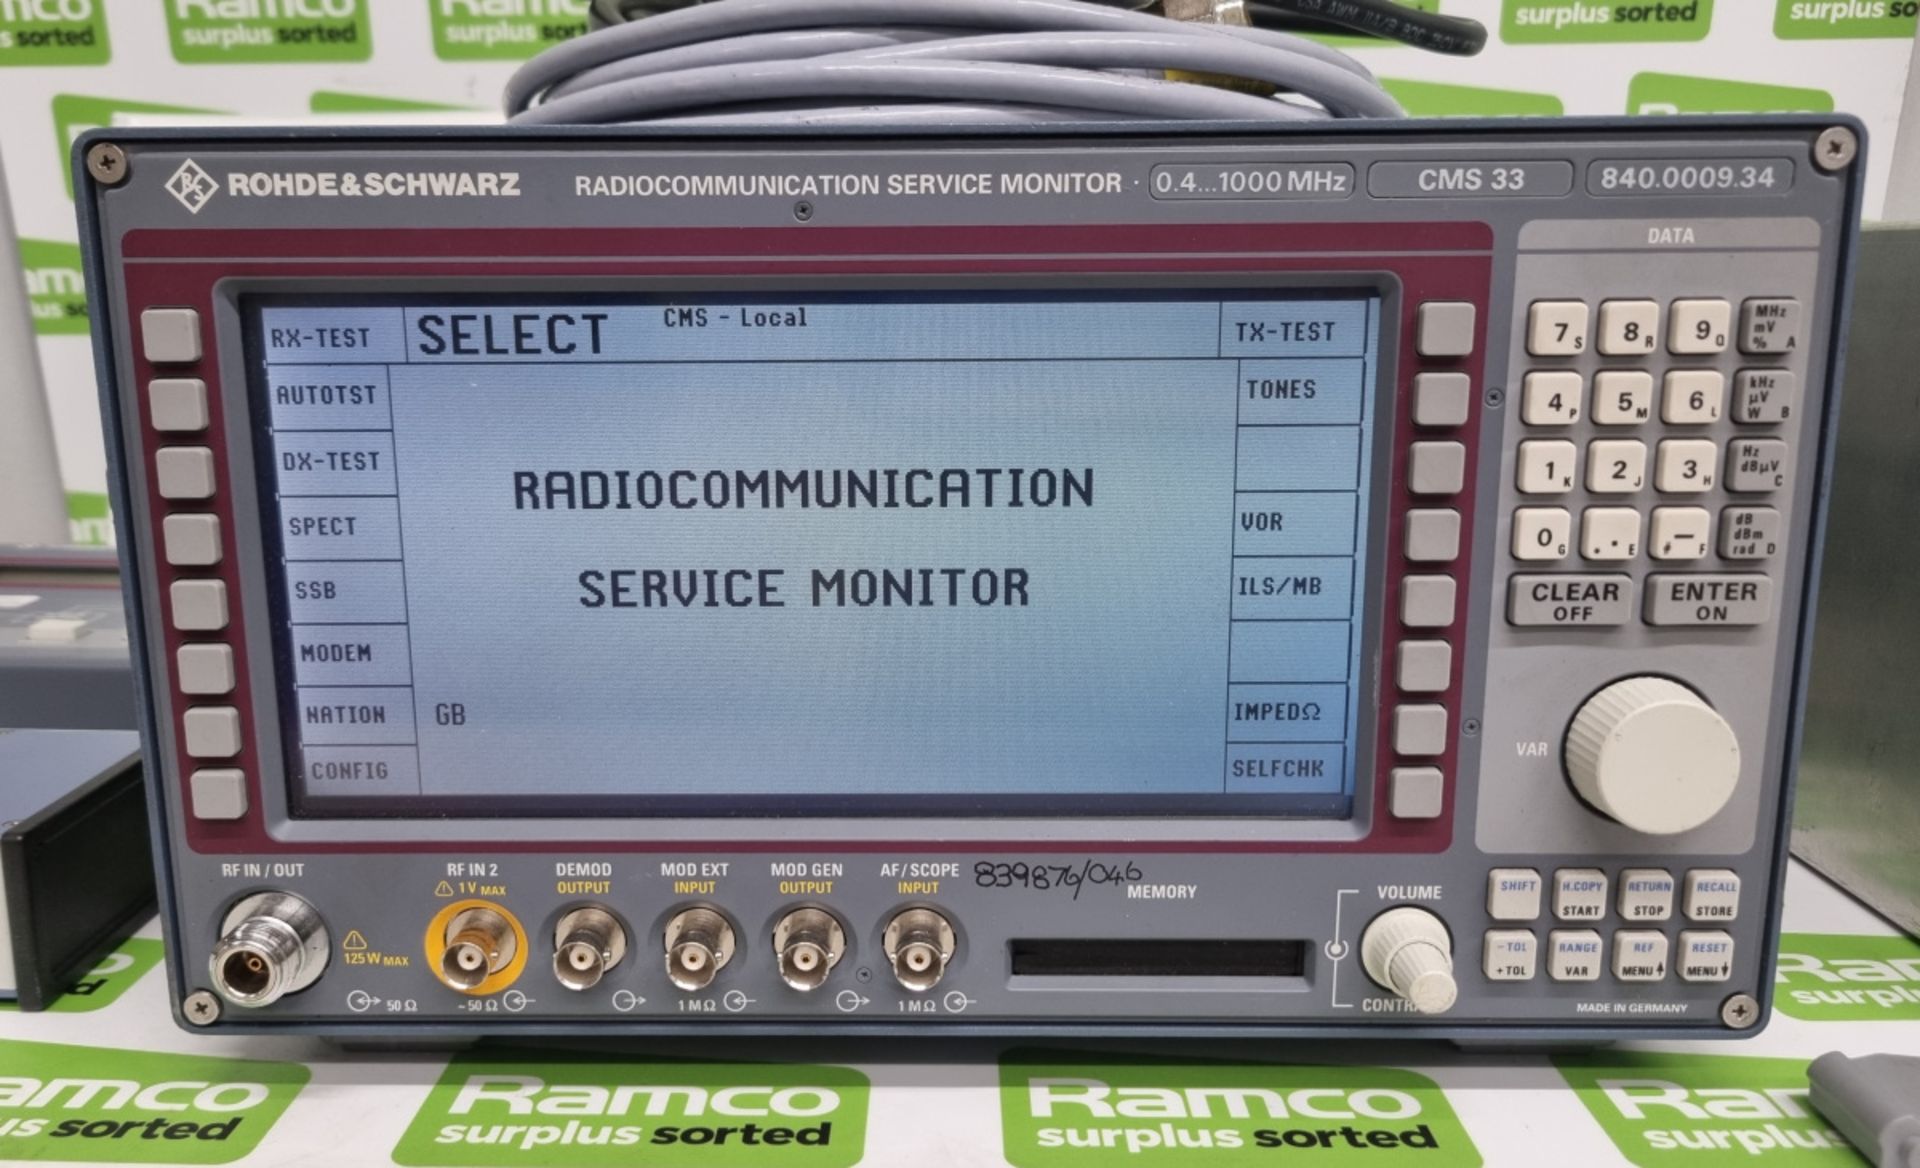 Rohde & Schwarz CMS33 Radiocommunication Service Monitor 0.4 - 1000mhz - 840.0009.34 with carry case - Image 2 of 14